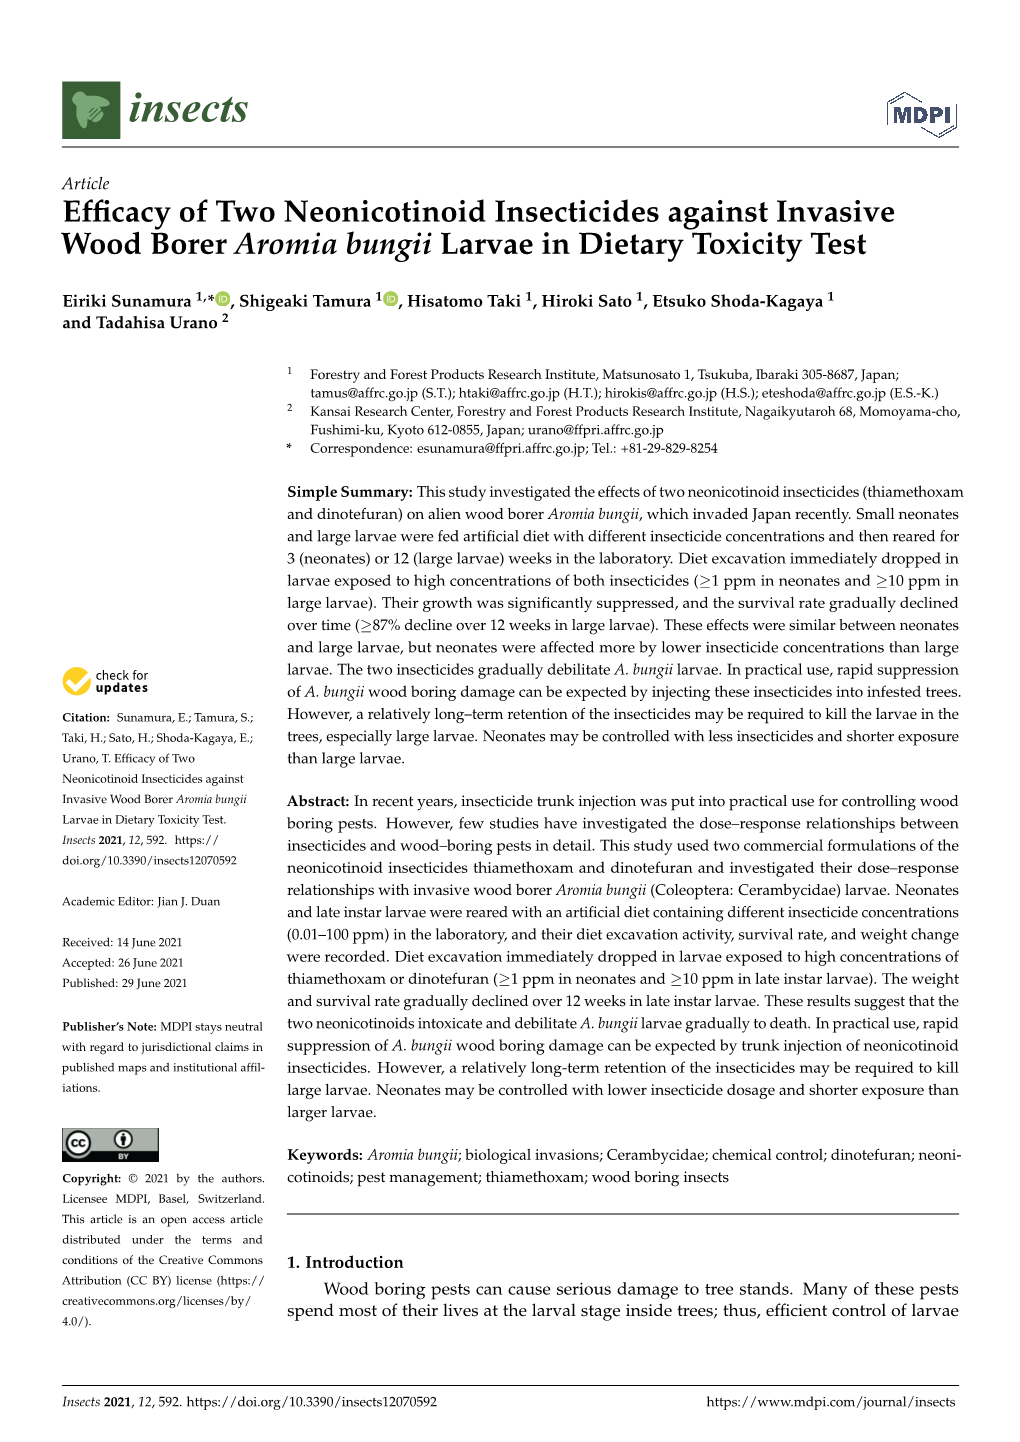 Efficacy of Two Neonicotinoid Insecticides Against Invasive Wood Borer Aromia Bungii Larvae in Dietary Toxicity Test